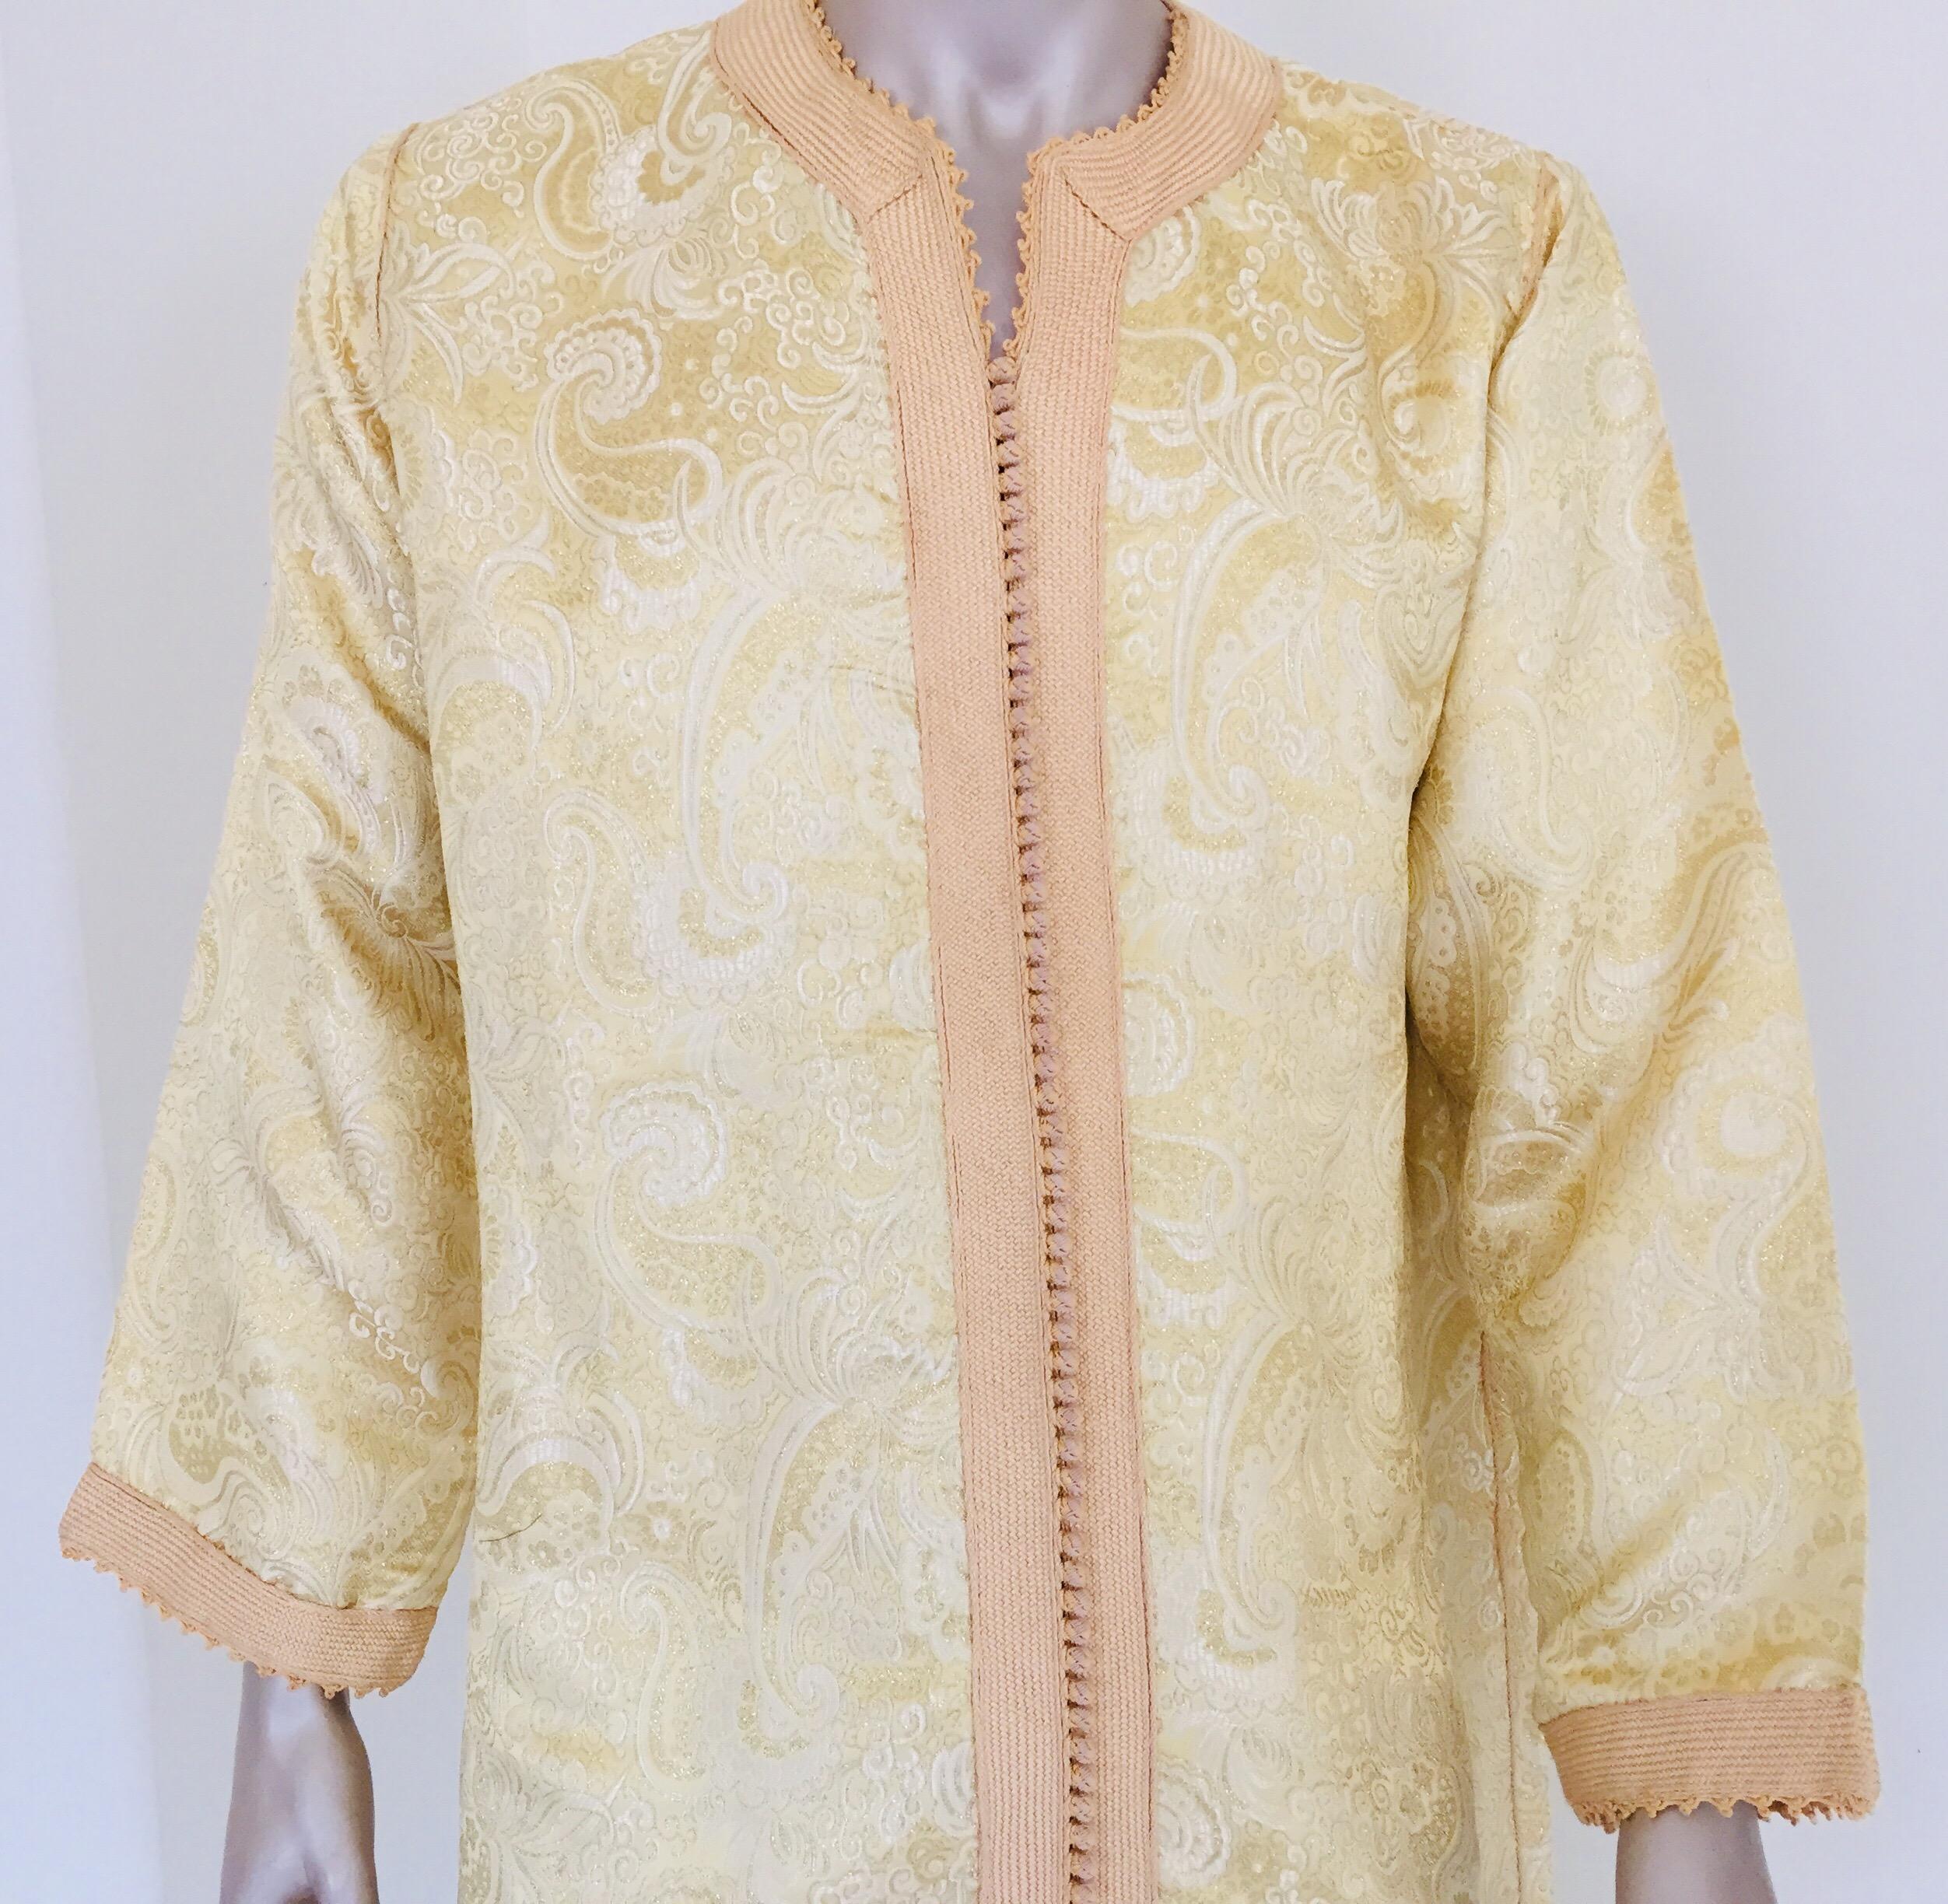 20th Century Moroccan Kaftan Gold and Silver Brocade 1970s Maxi Dress Caftan For Sale